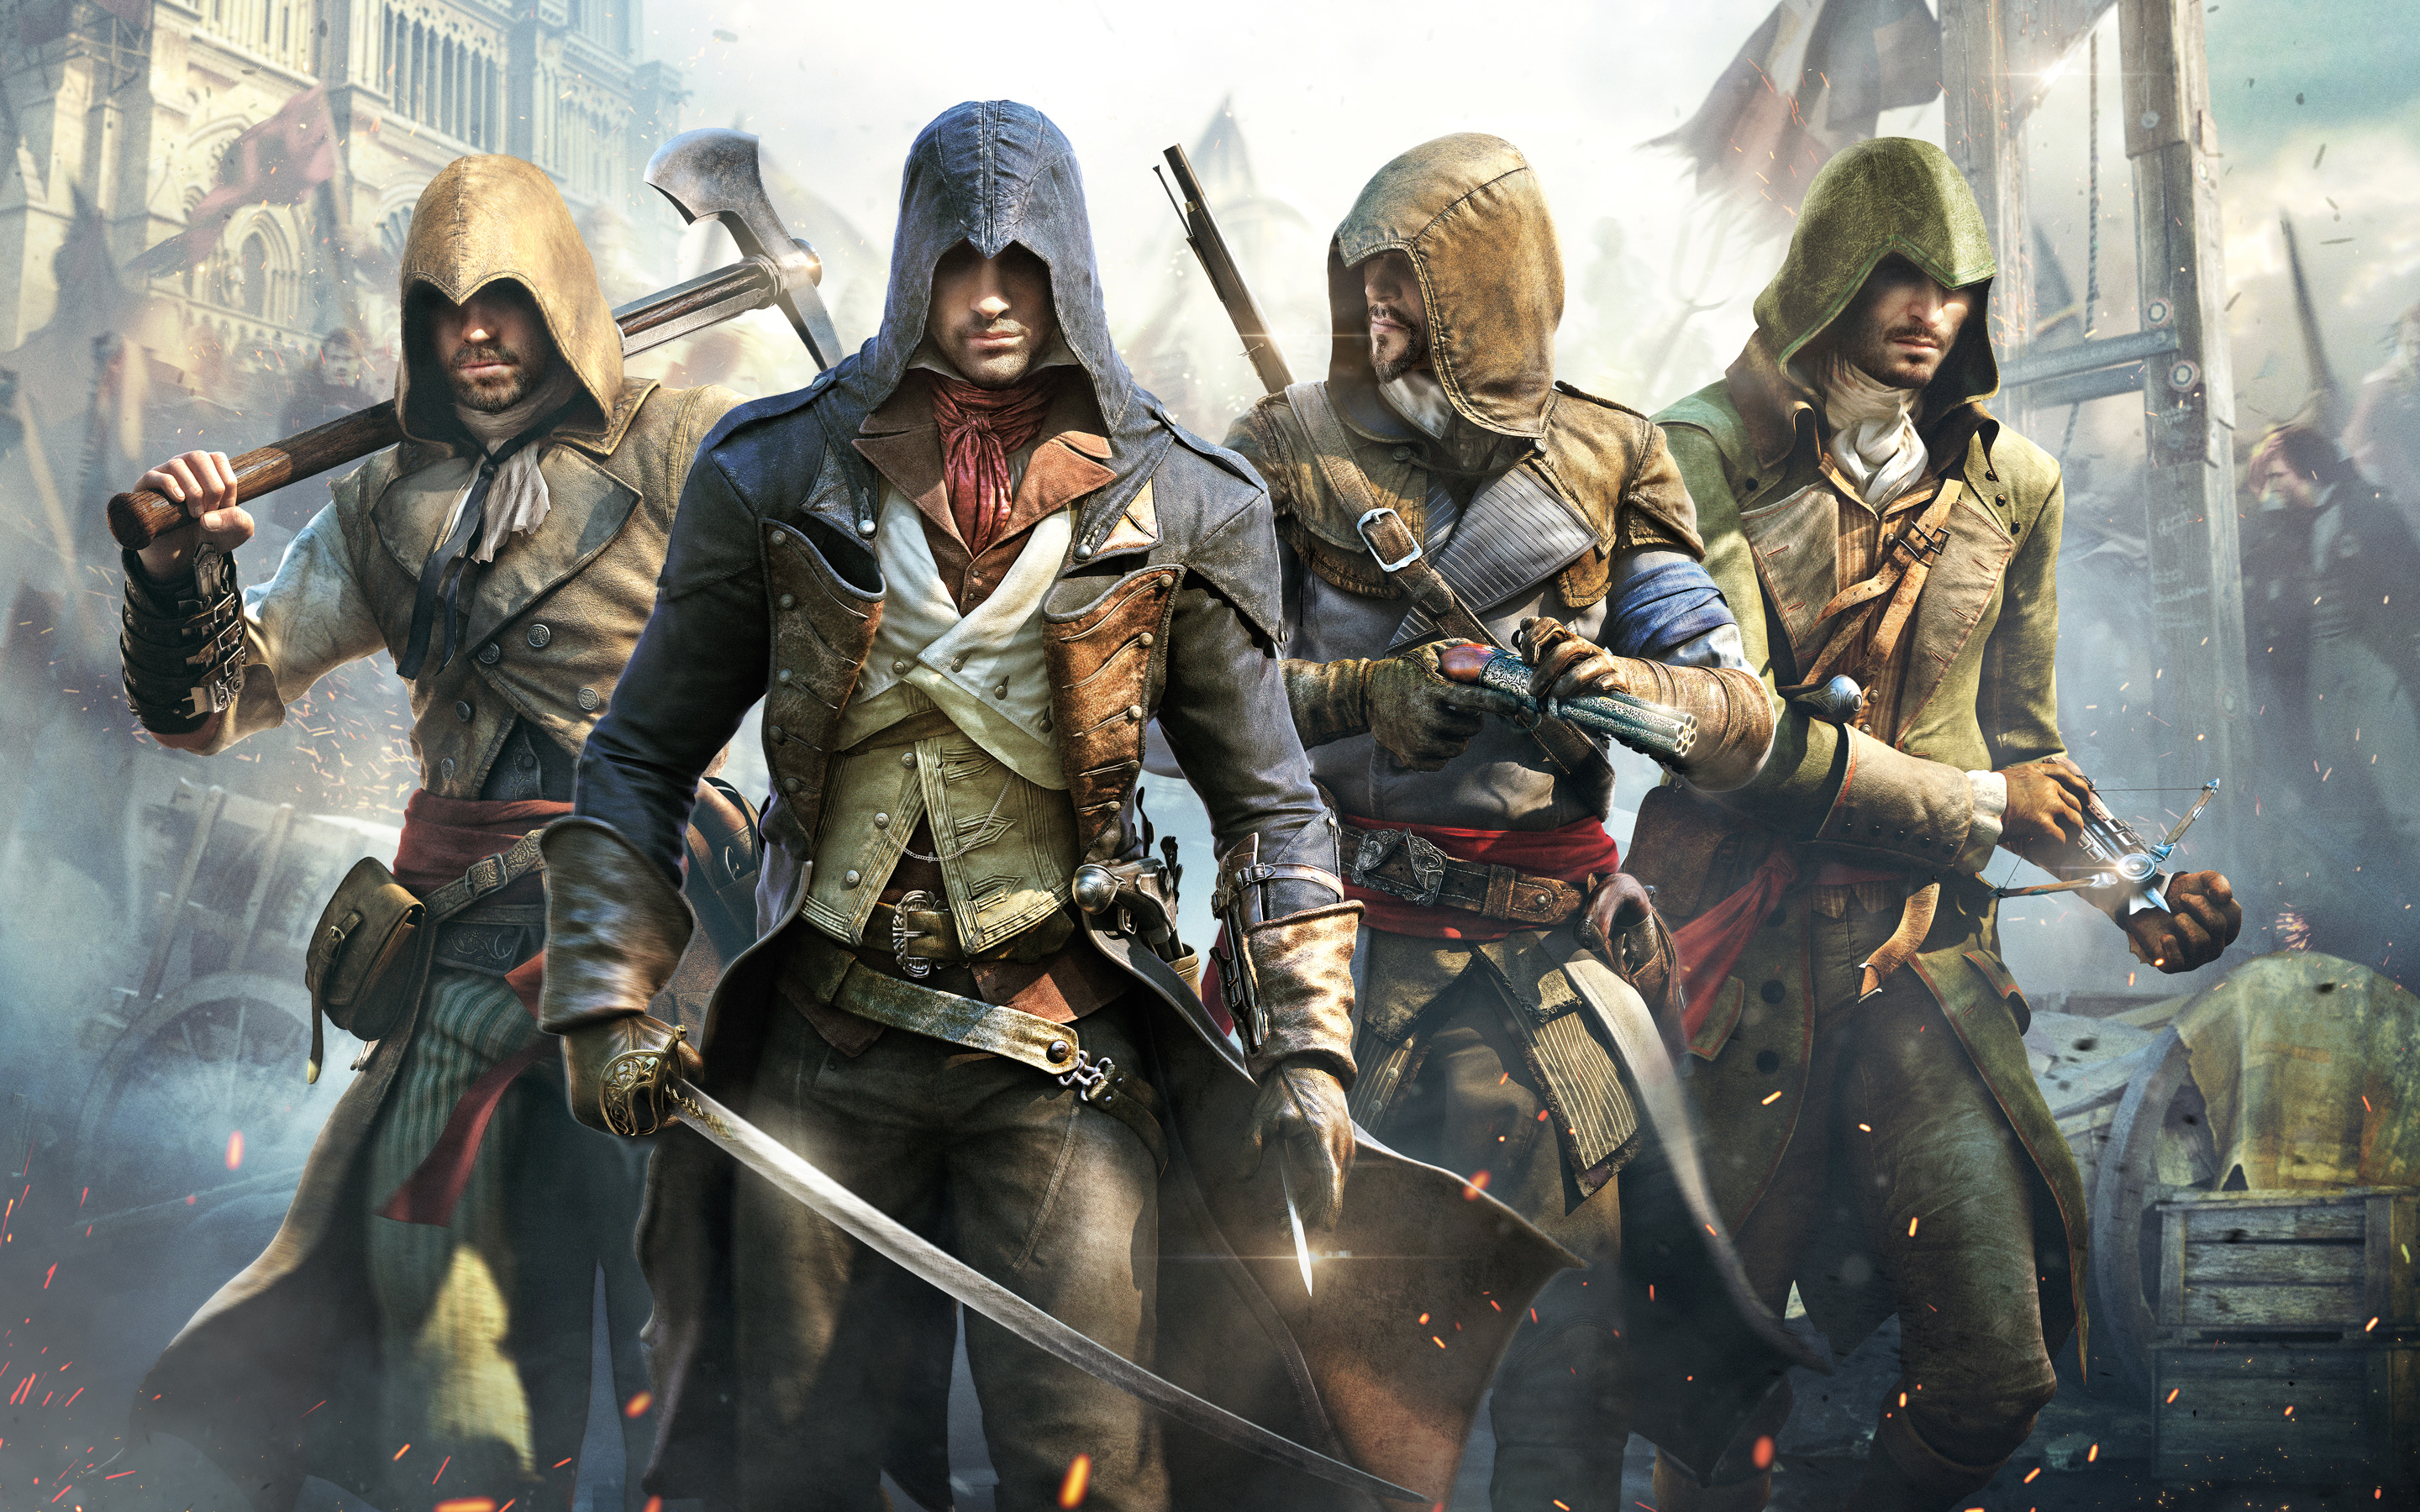 Awesome Assassins Creed Unity Wallpaper 2880x1800 25284